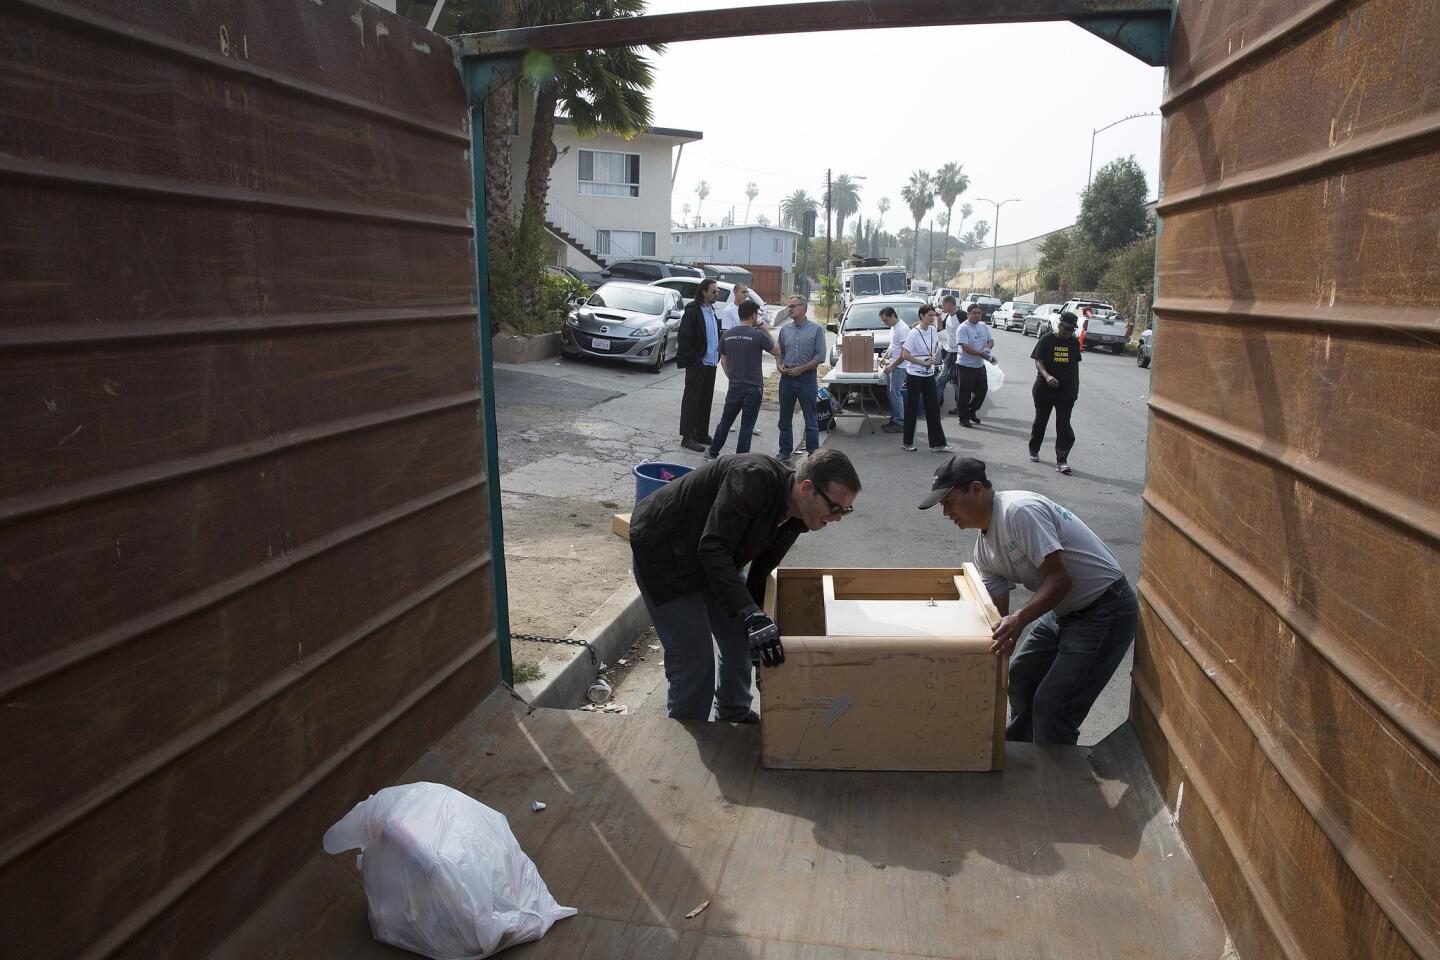 Volunteers load a discarded cabinet into a dumpster as they help clean up Kingsley Street in a monthly meet-up organized by the East Hollywood Neighborhood Council on May 30, 2015.